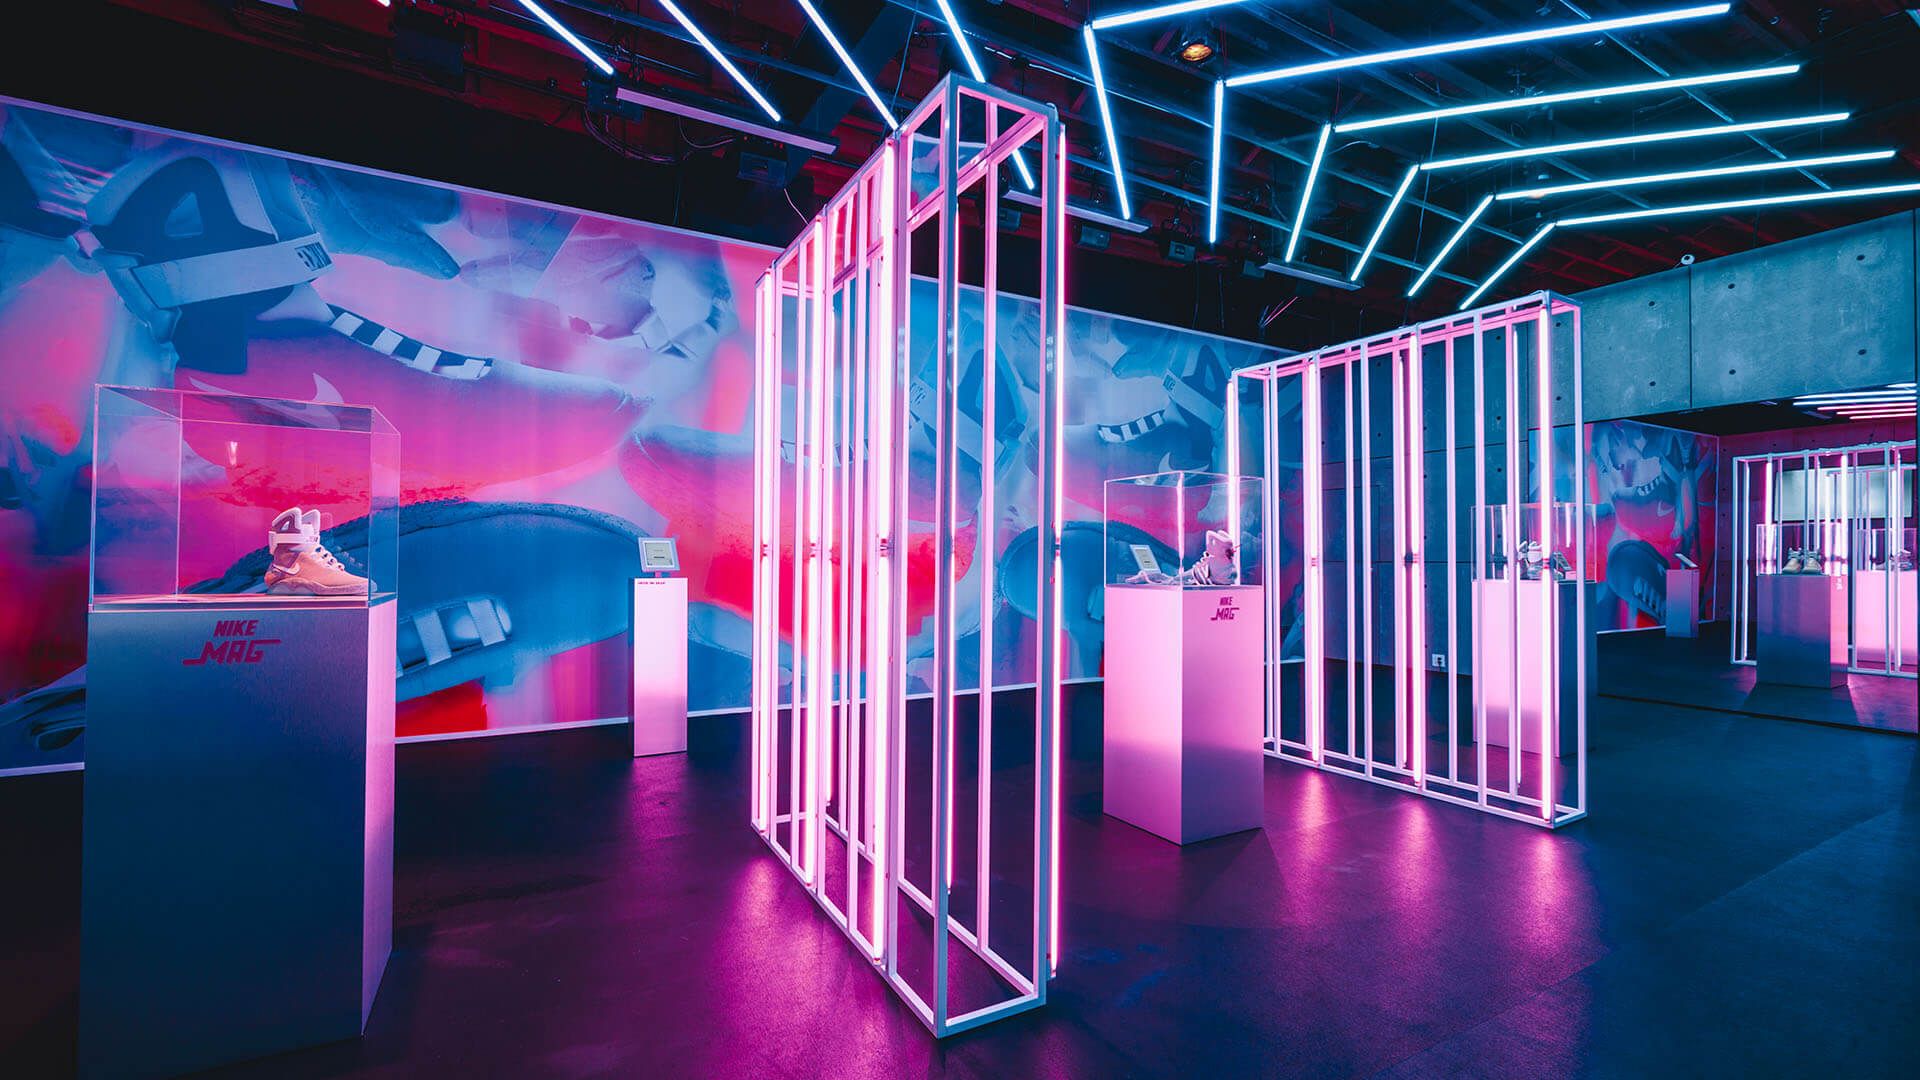 glowing neon walls and ceiling with Nike Mags on podium